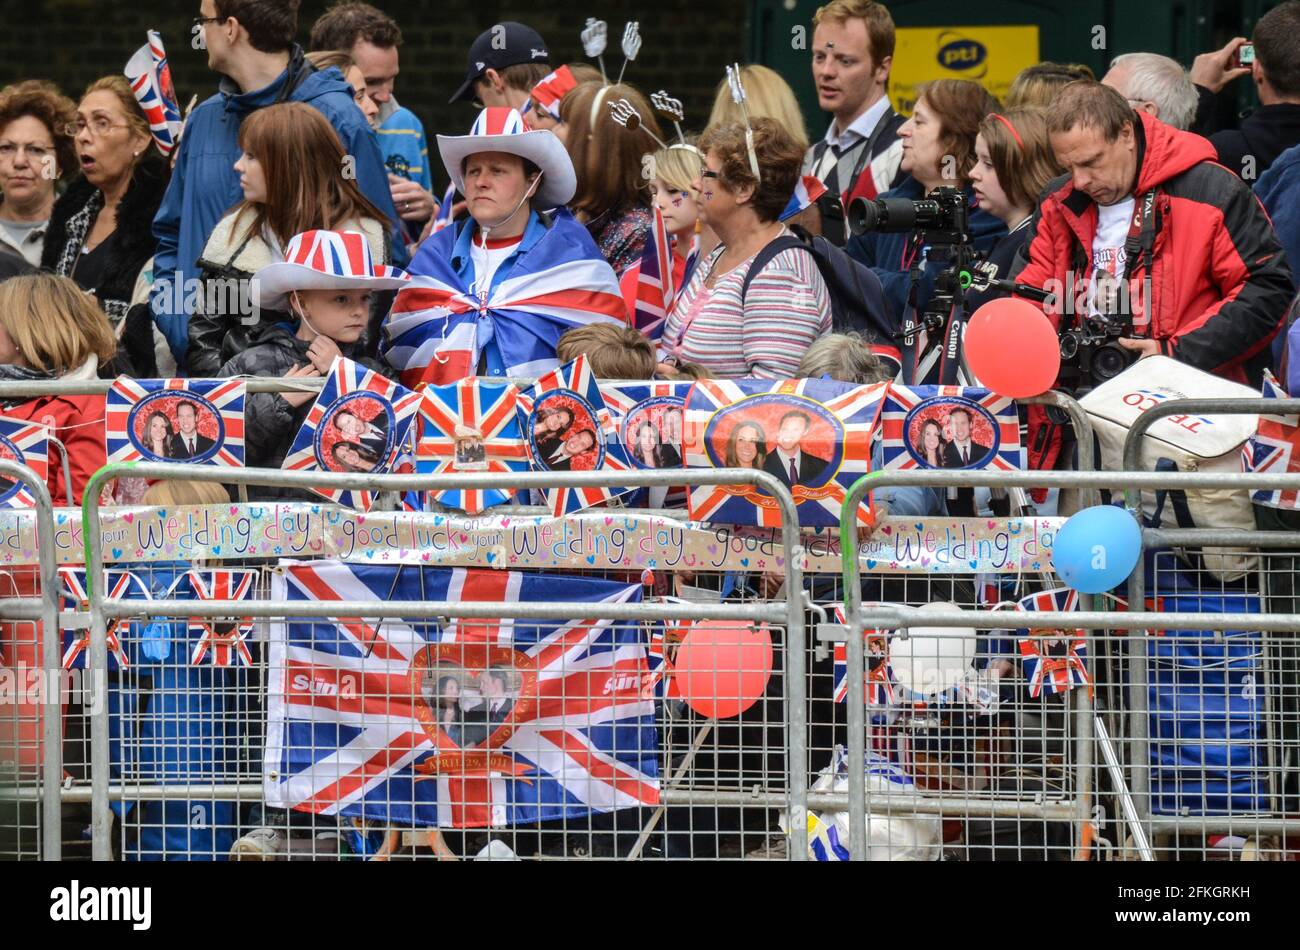 2011 Royal wedding. Large numbers of people crowd into The Mall to catch a glimpse of William and Kate. Visitors waiting. Women and children. Families Stock Photo